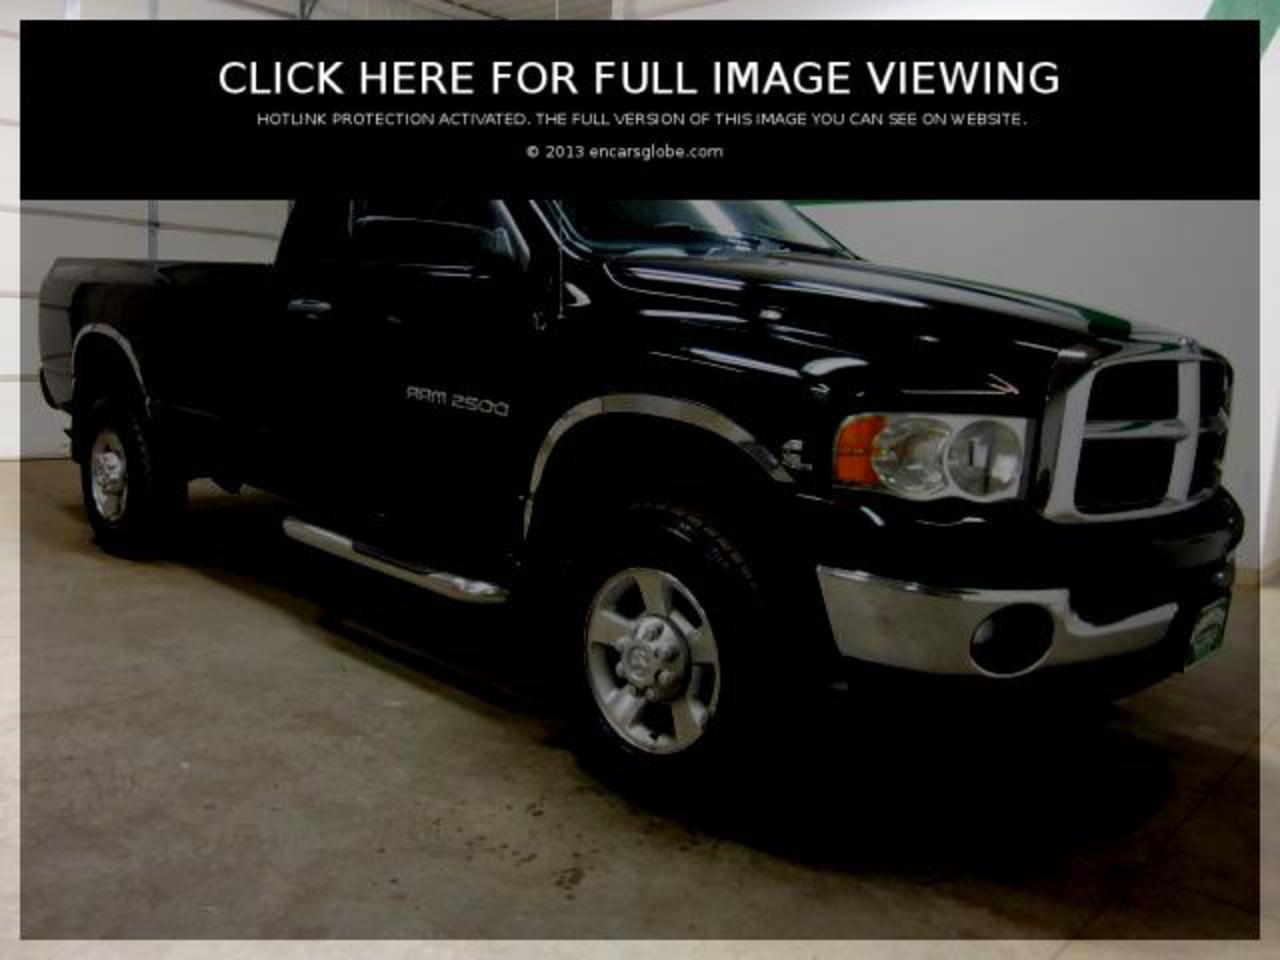 Dodge Ram 2500 SLT Heavy Duty Photo Gallery: Photo #04 out of 9 ...